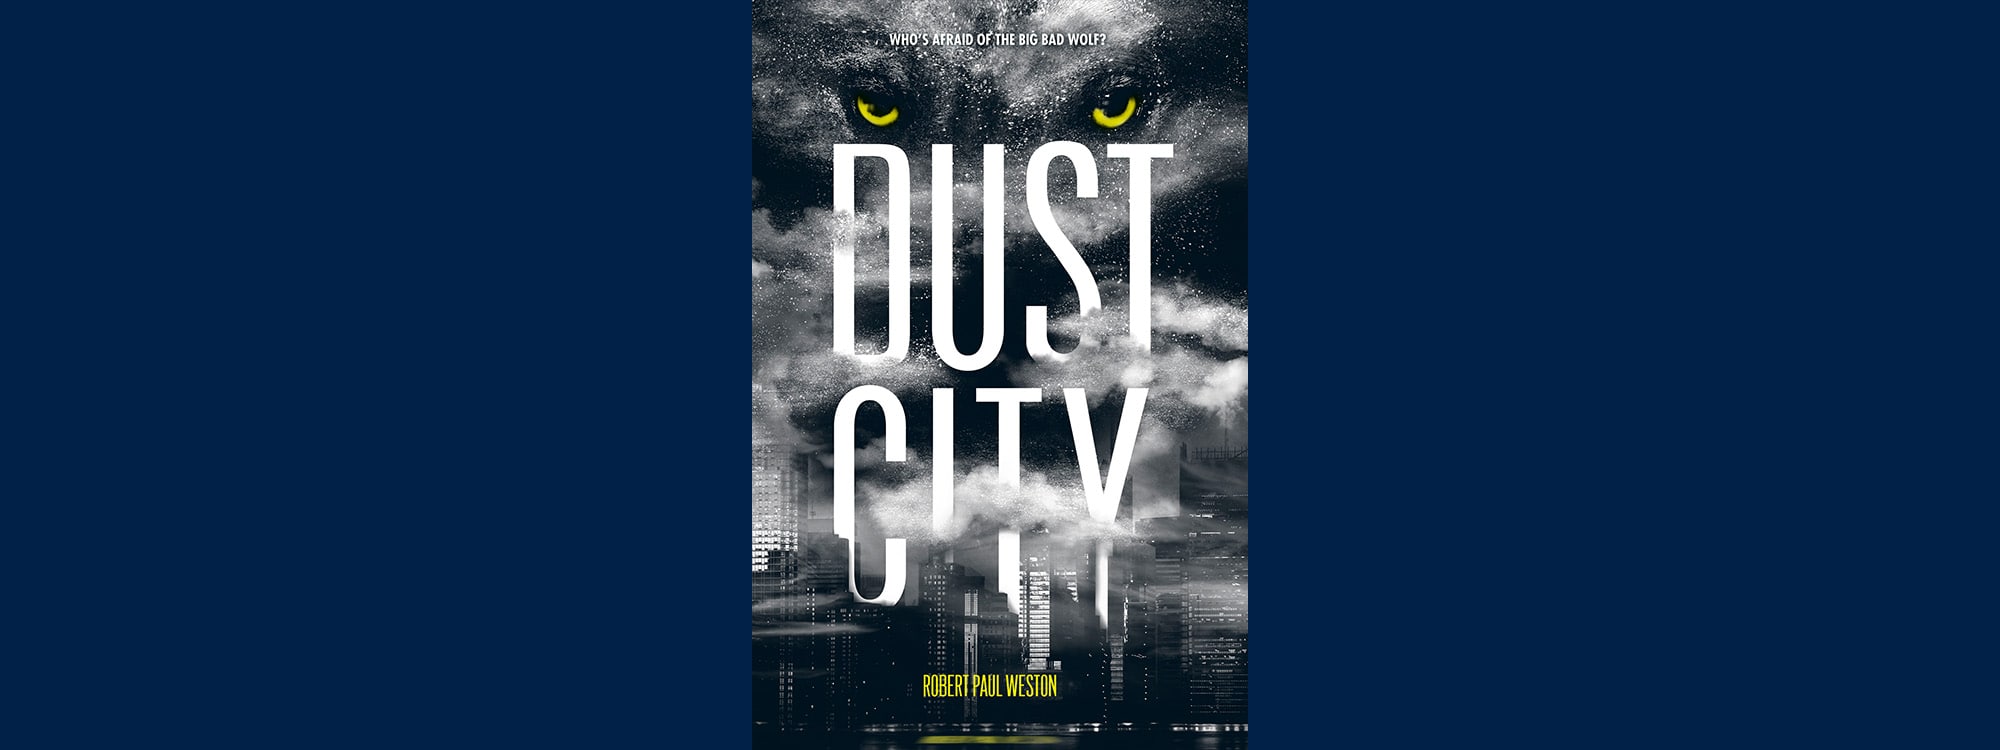 Book Cover for Dust City. The face of a wolf looking over a city.